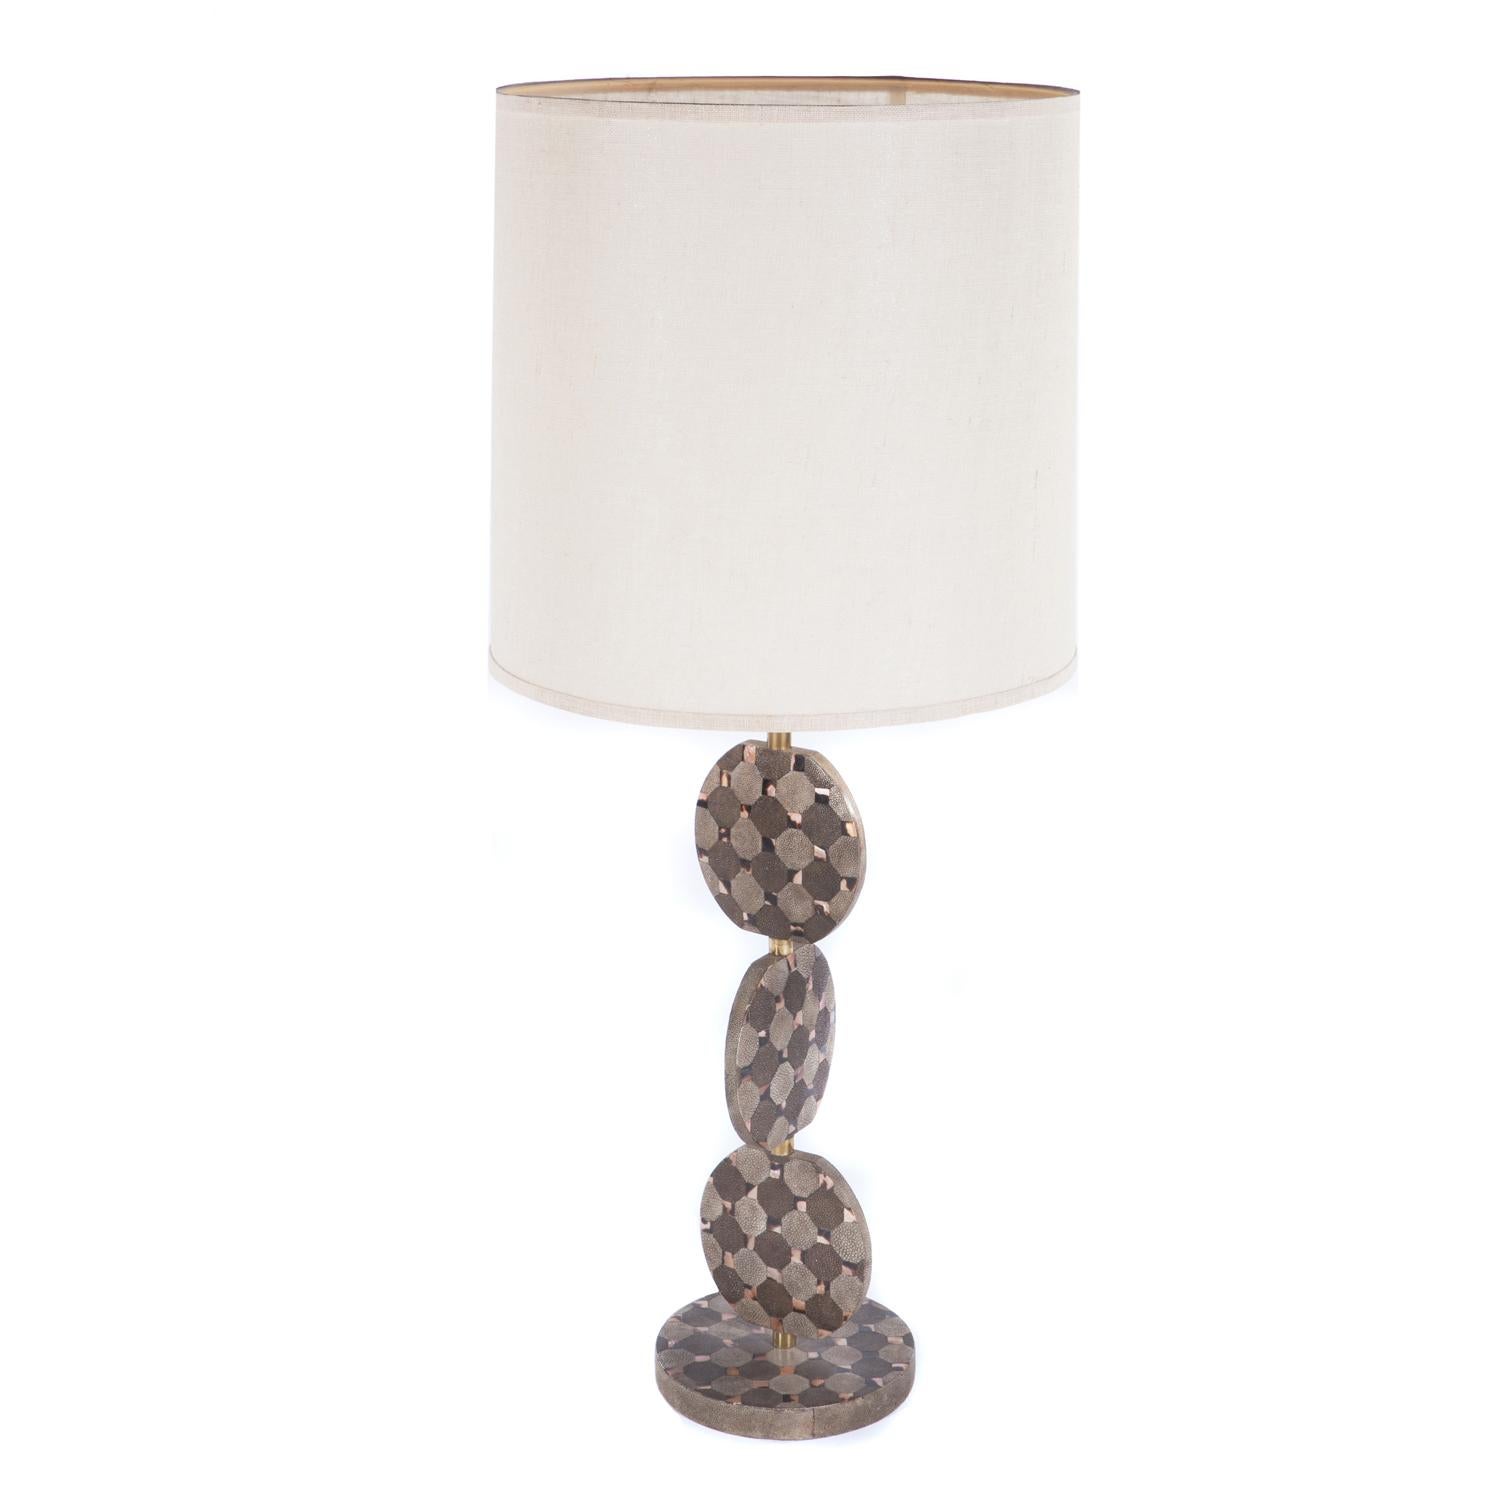 Large sculptural table lamp with stacked disc design in shagreen and horn with brass fittings by R&Y Augousti, France, 1980's.

Measures: Shade diameter 14 inches
Shade height 17.5 inches.